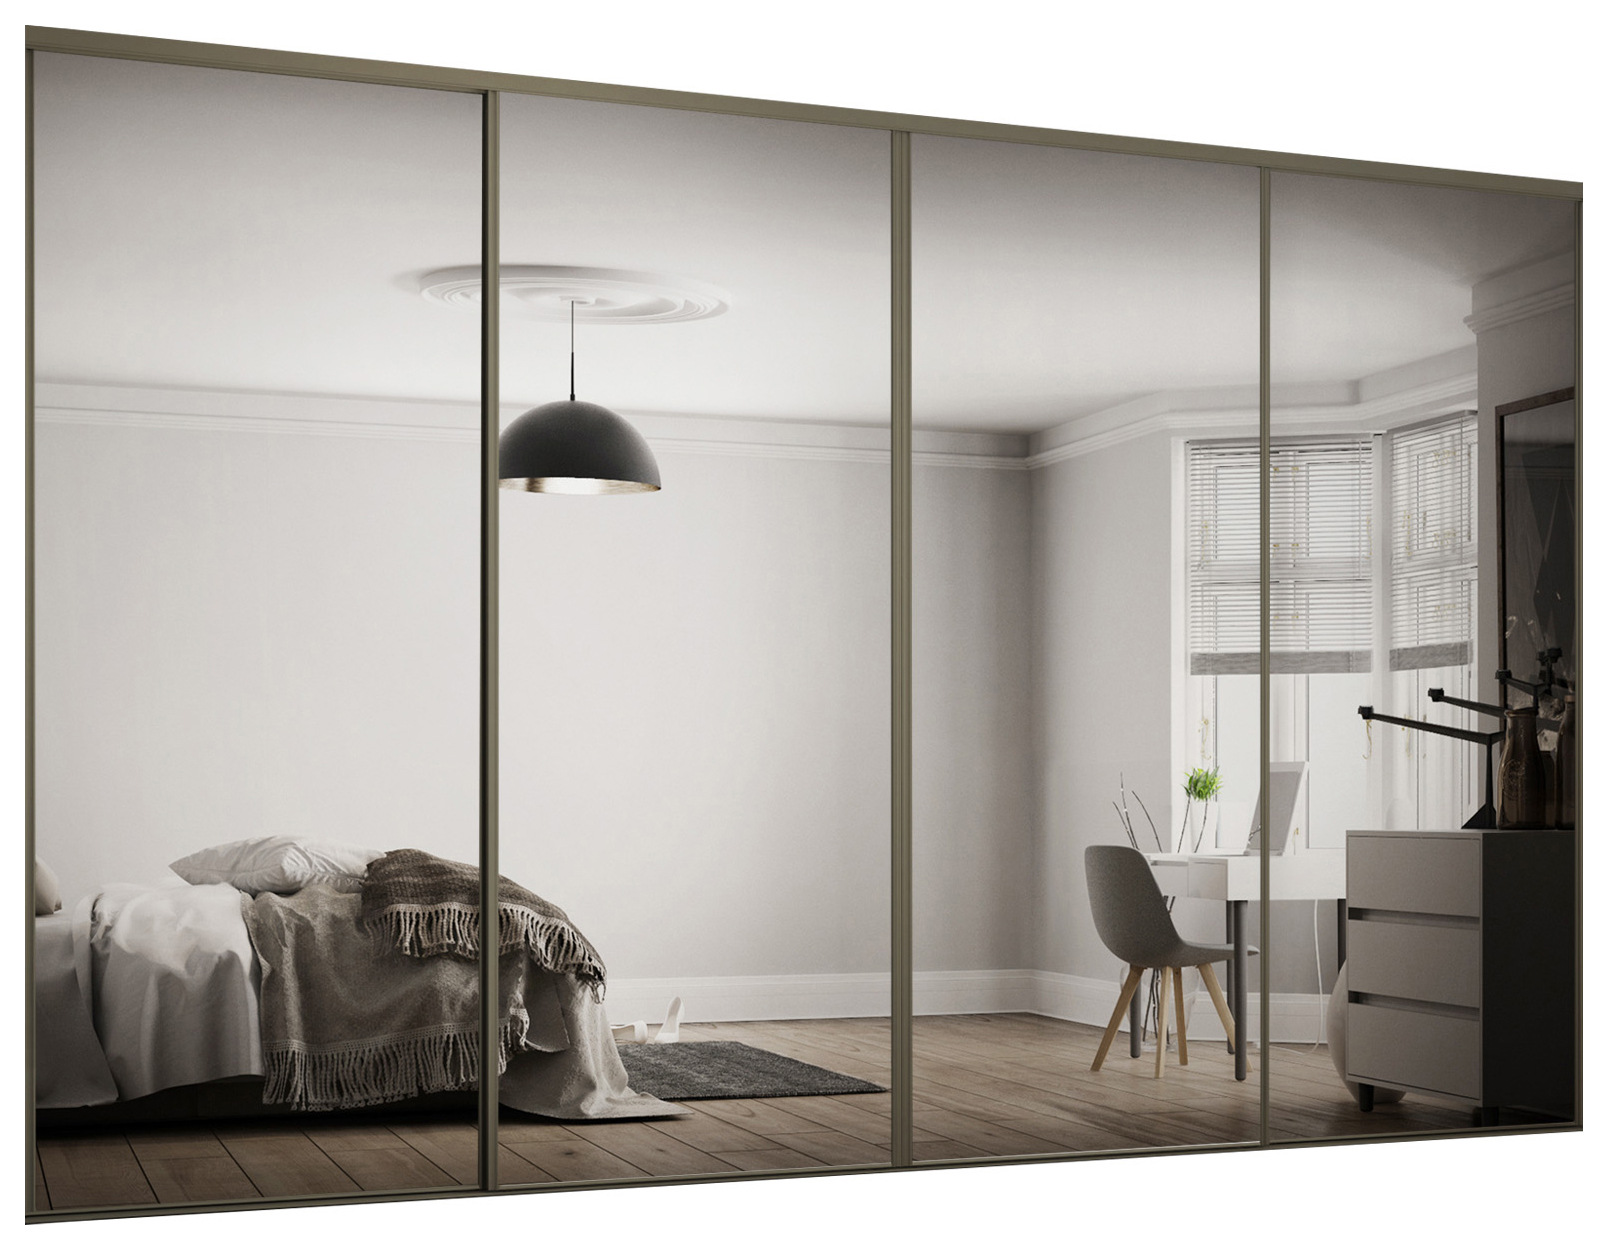 Image of Spacepro Heritage 4 x 914mm Nickel Frame Mirror Sliding Door Kit with Colour Matched Track